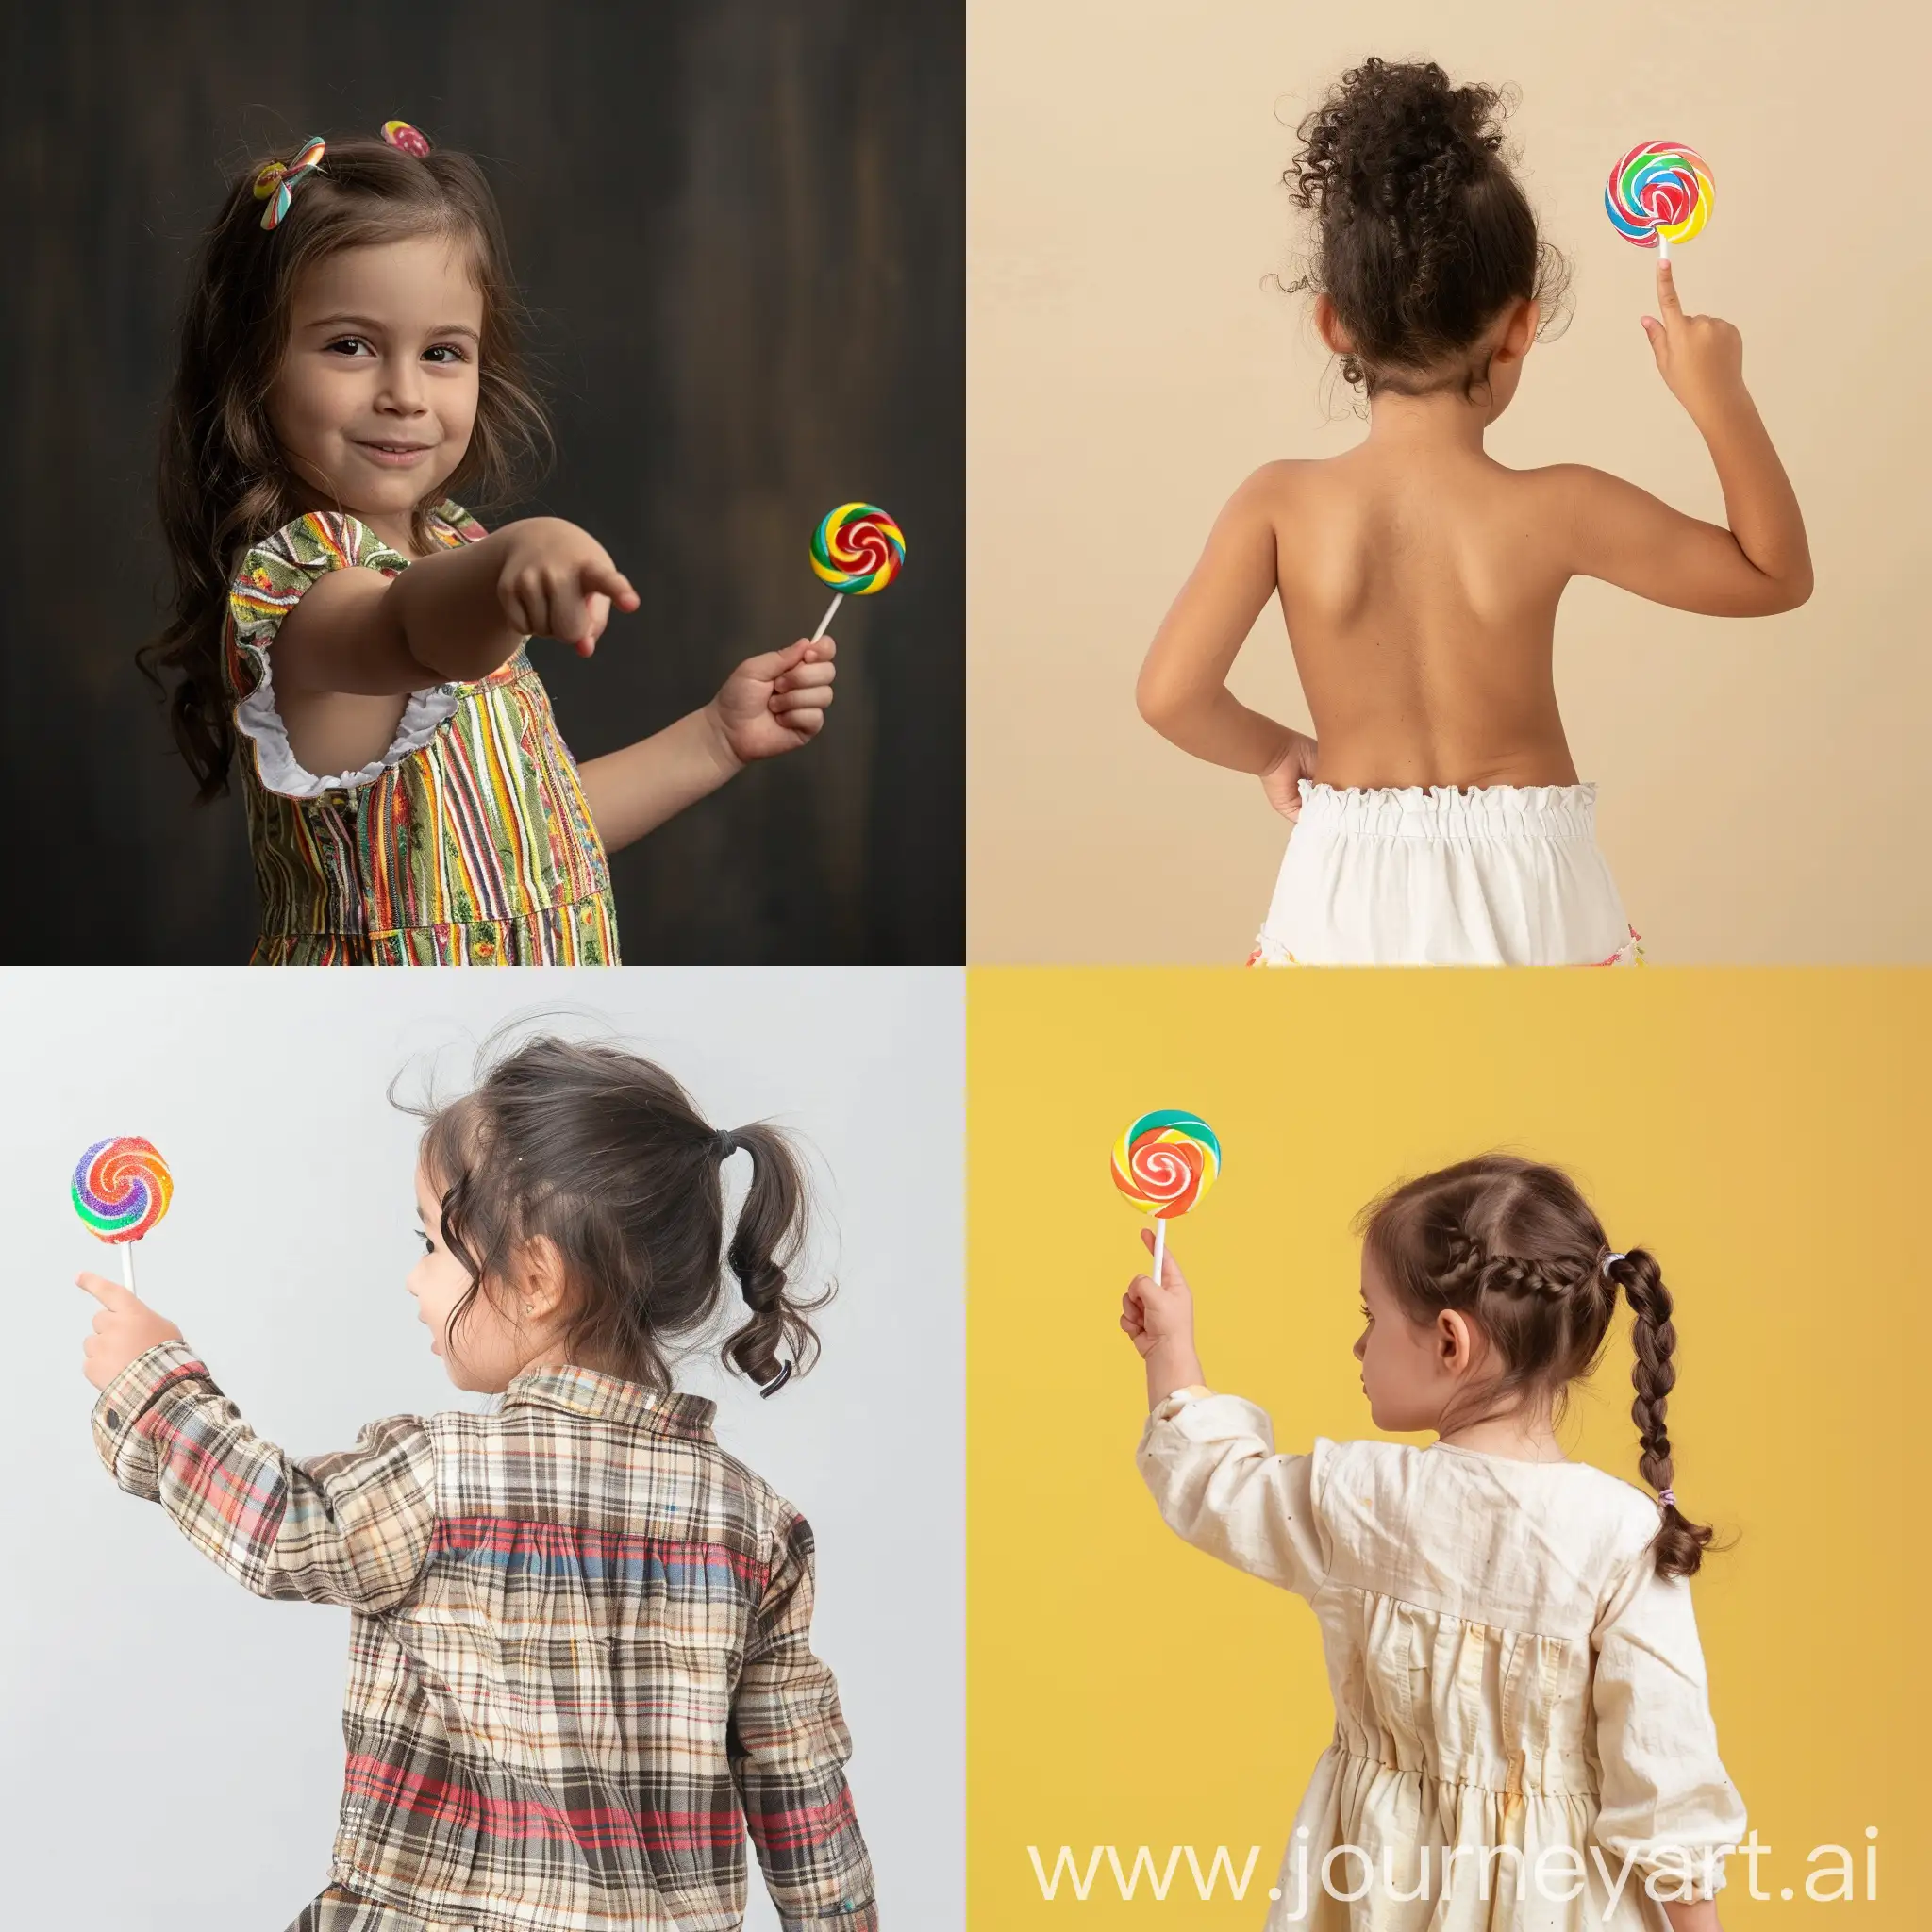 Adorable-Little-Girl-Model-with-Lollipop-Pointing-Playfully